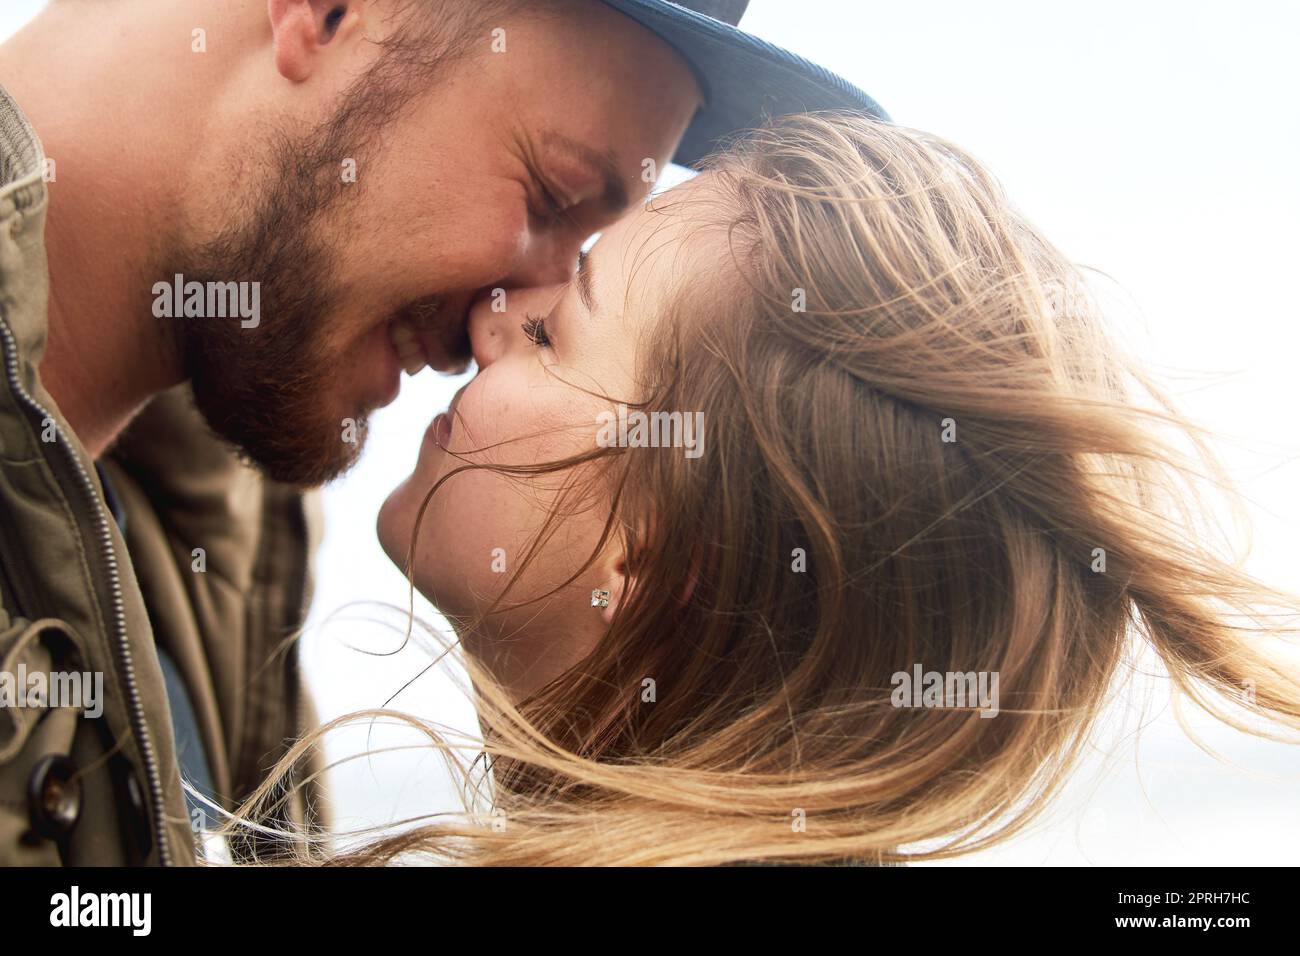 Young and in love. an affectionate young couple spending time together outdoors. Stock Photo